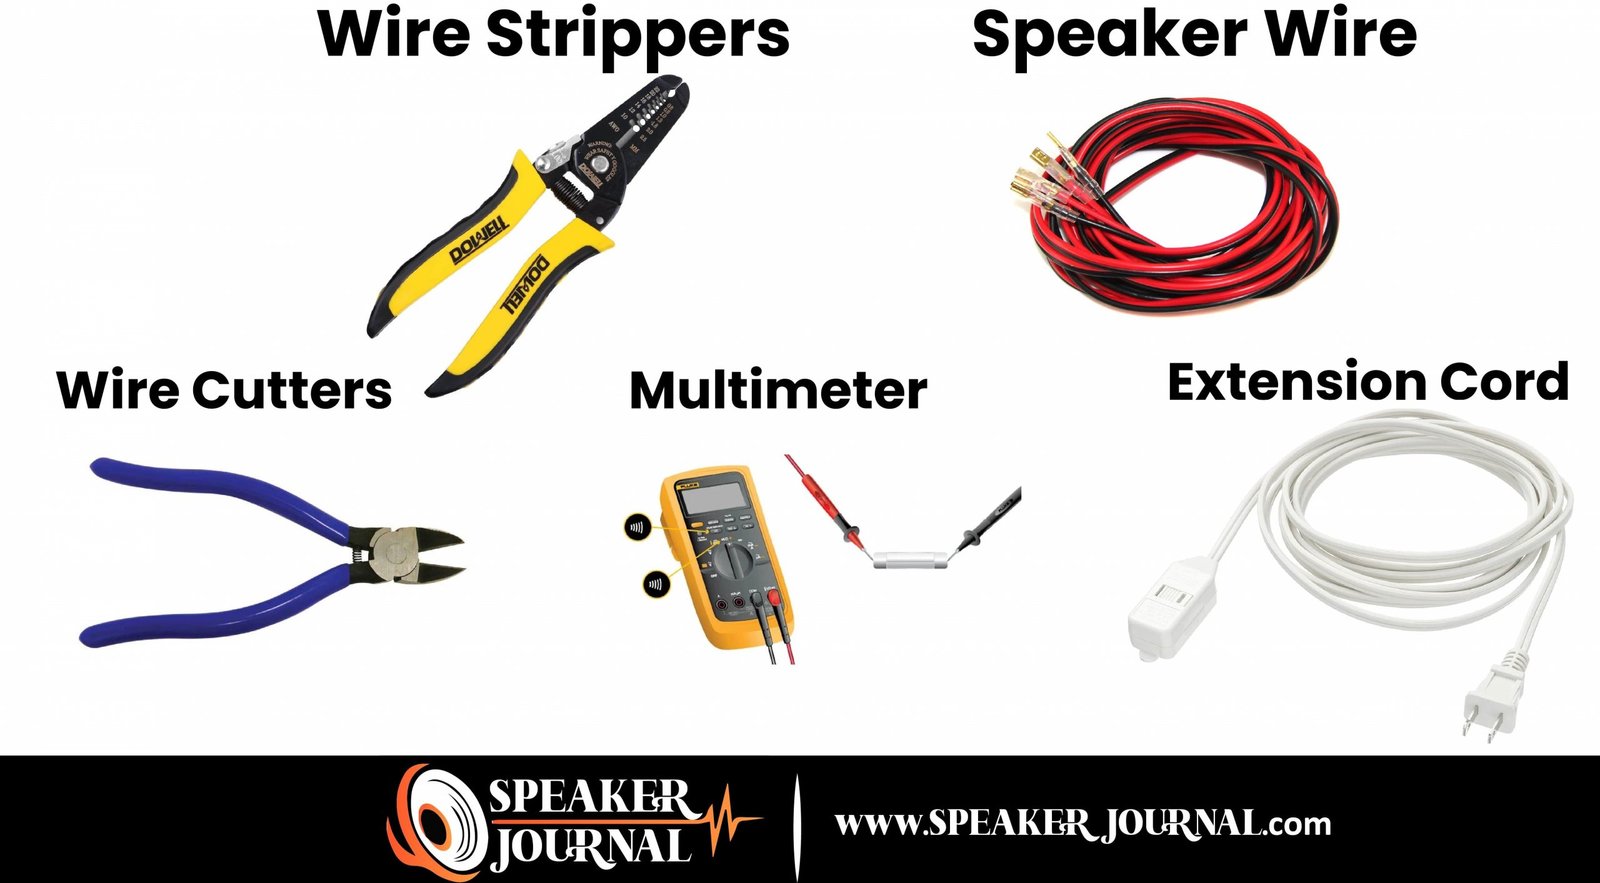 How To Extend Speaker Wire by speakerjournal.com